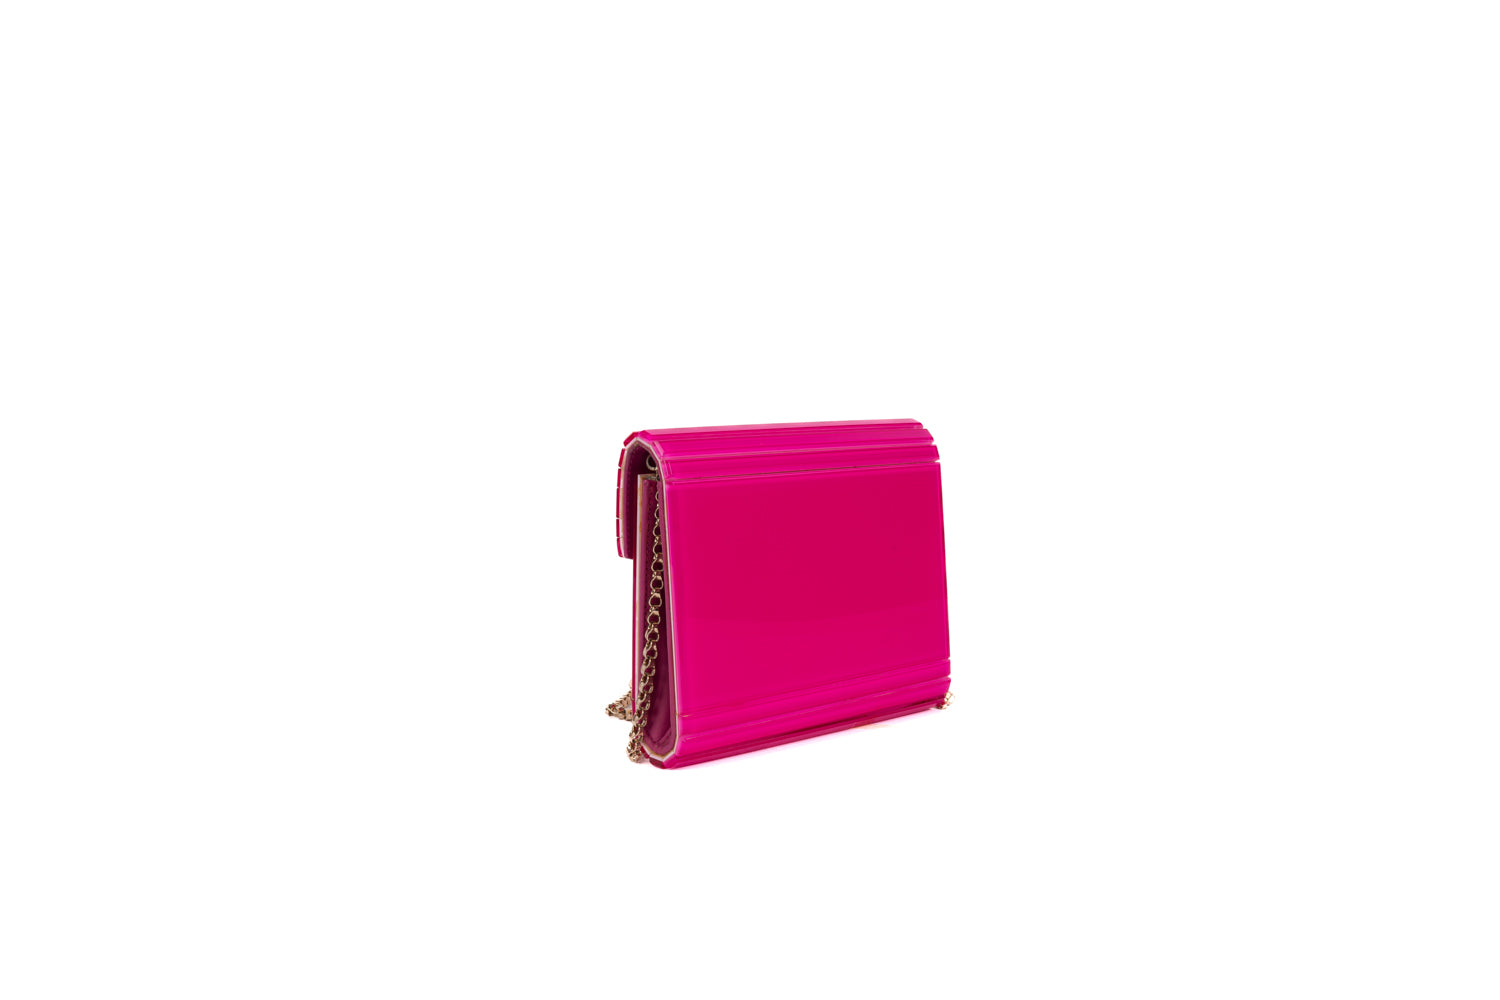 Neon Pink Acrylic Candy Clutch Bag